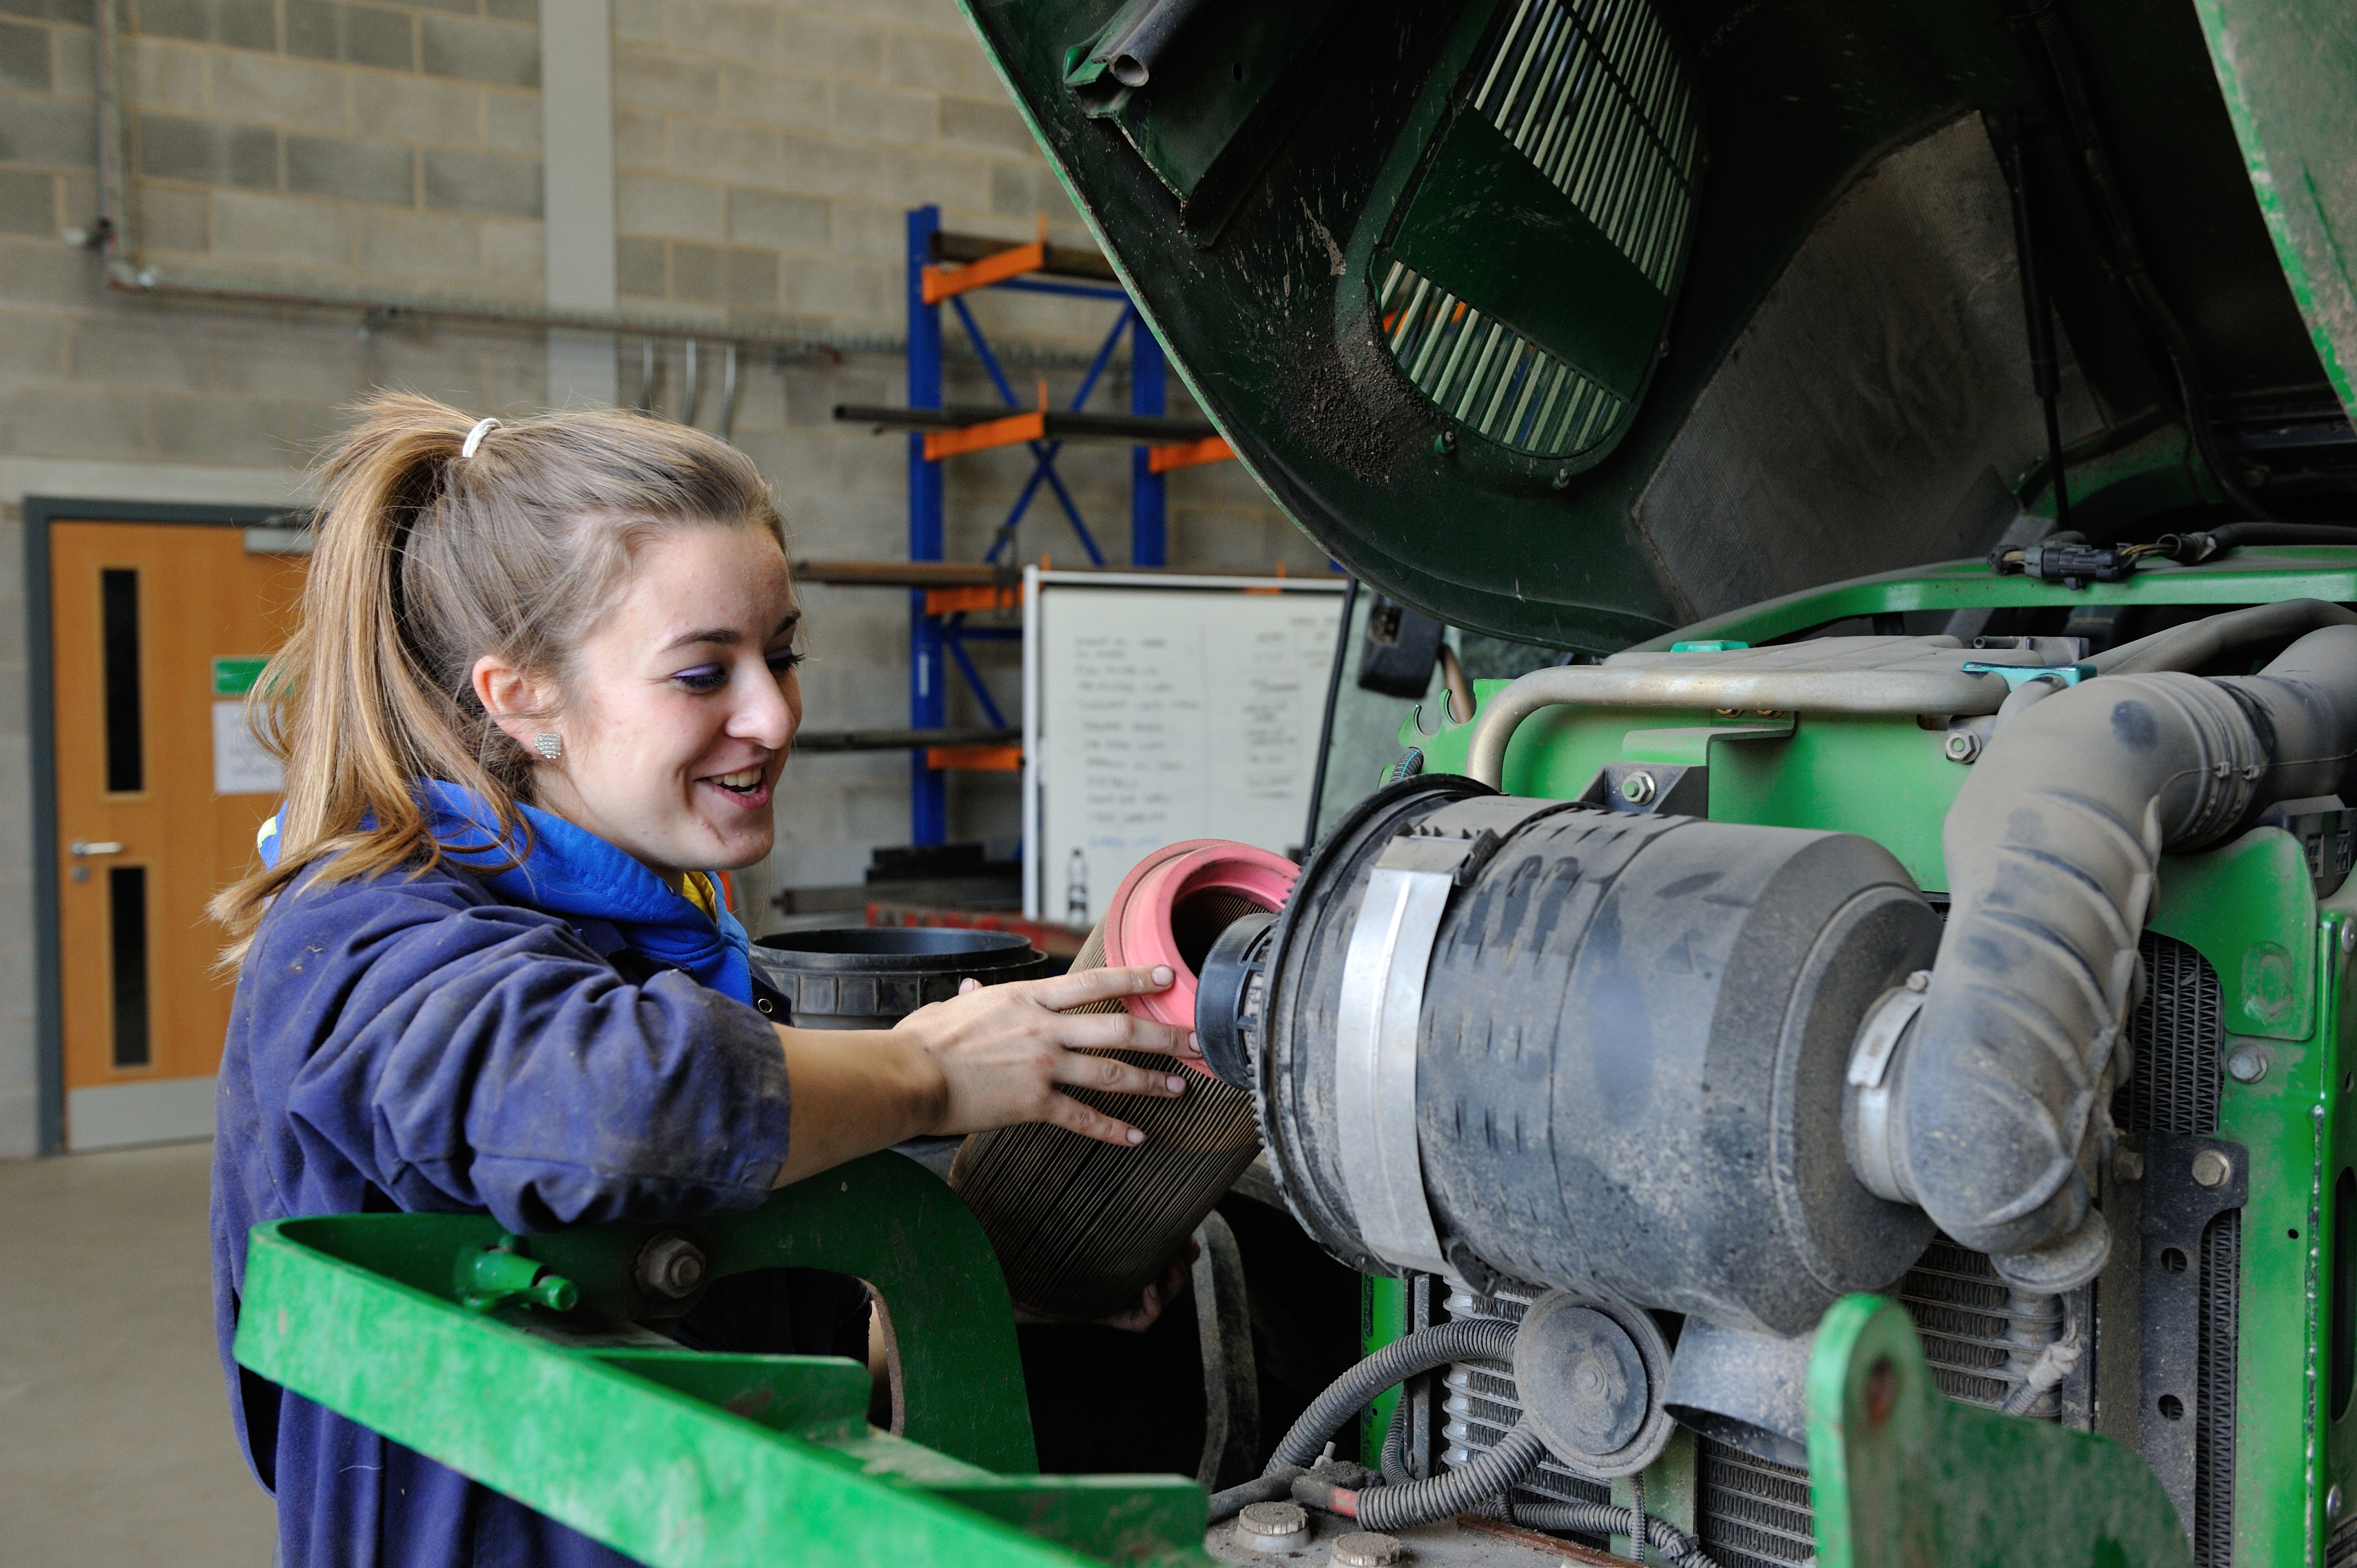 Myerscough College Agriculture student inspects a tractor